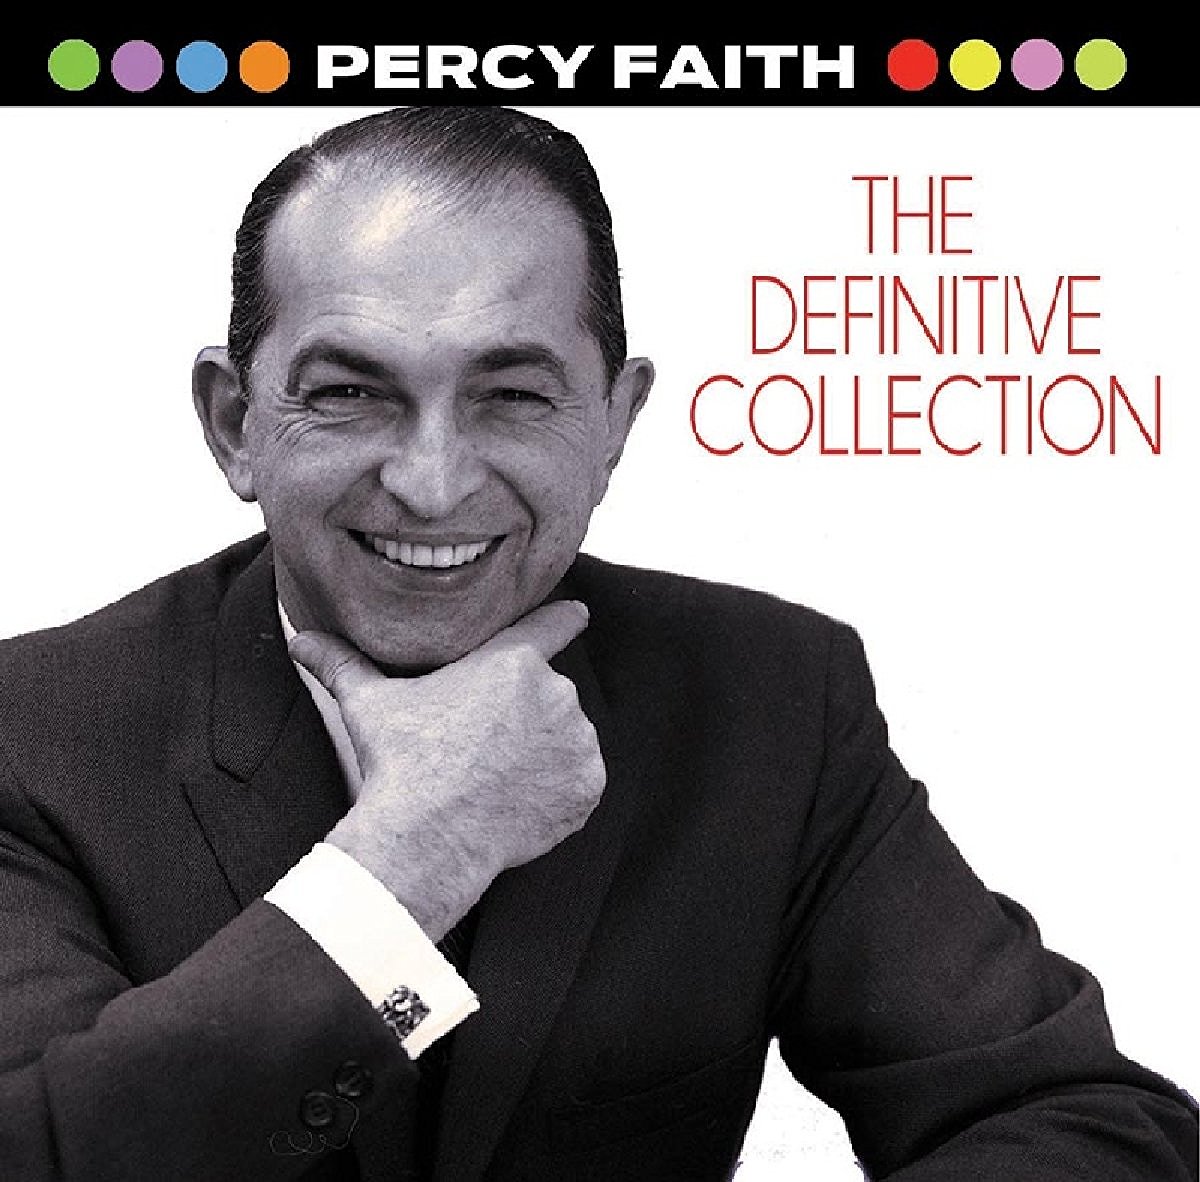 Percy Faith: The Definitive Collection (2-CD set)